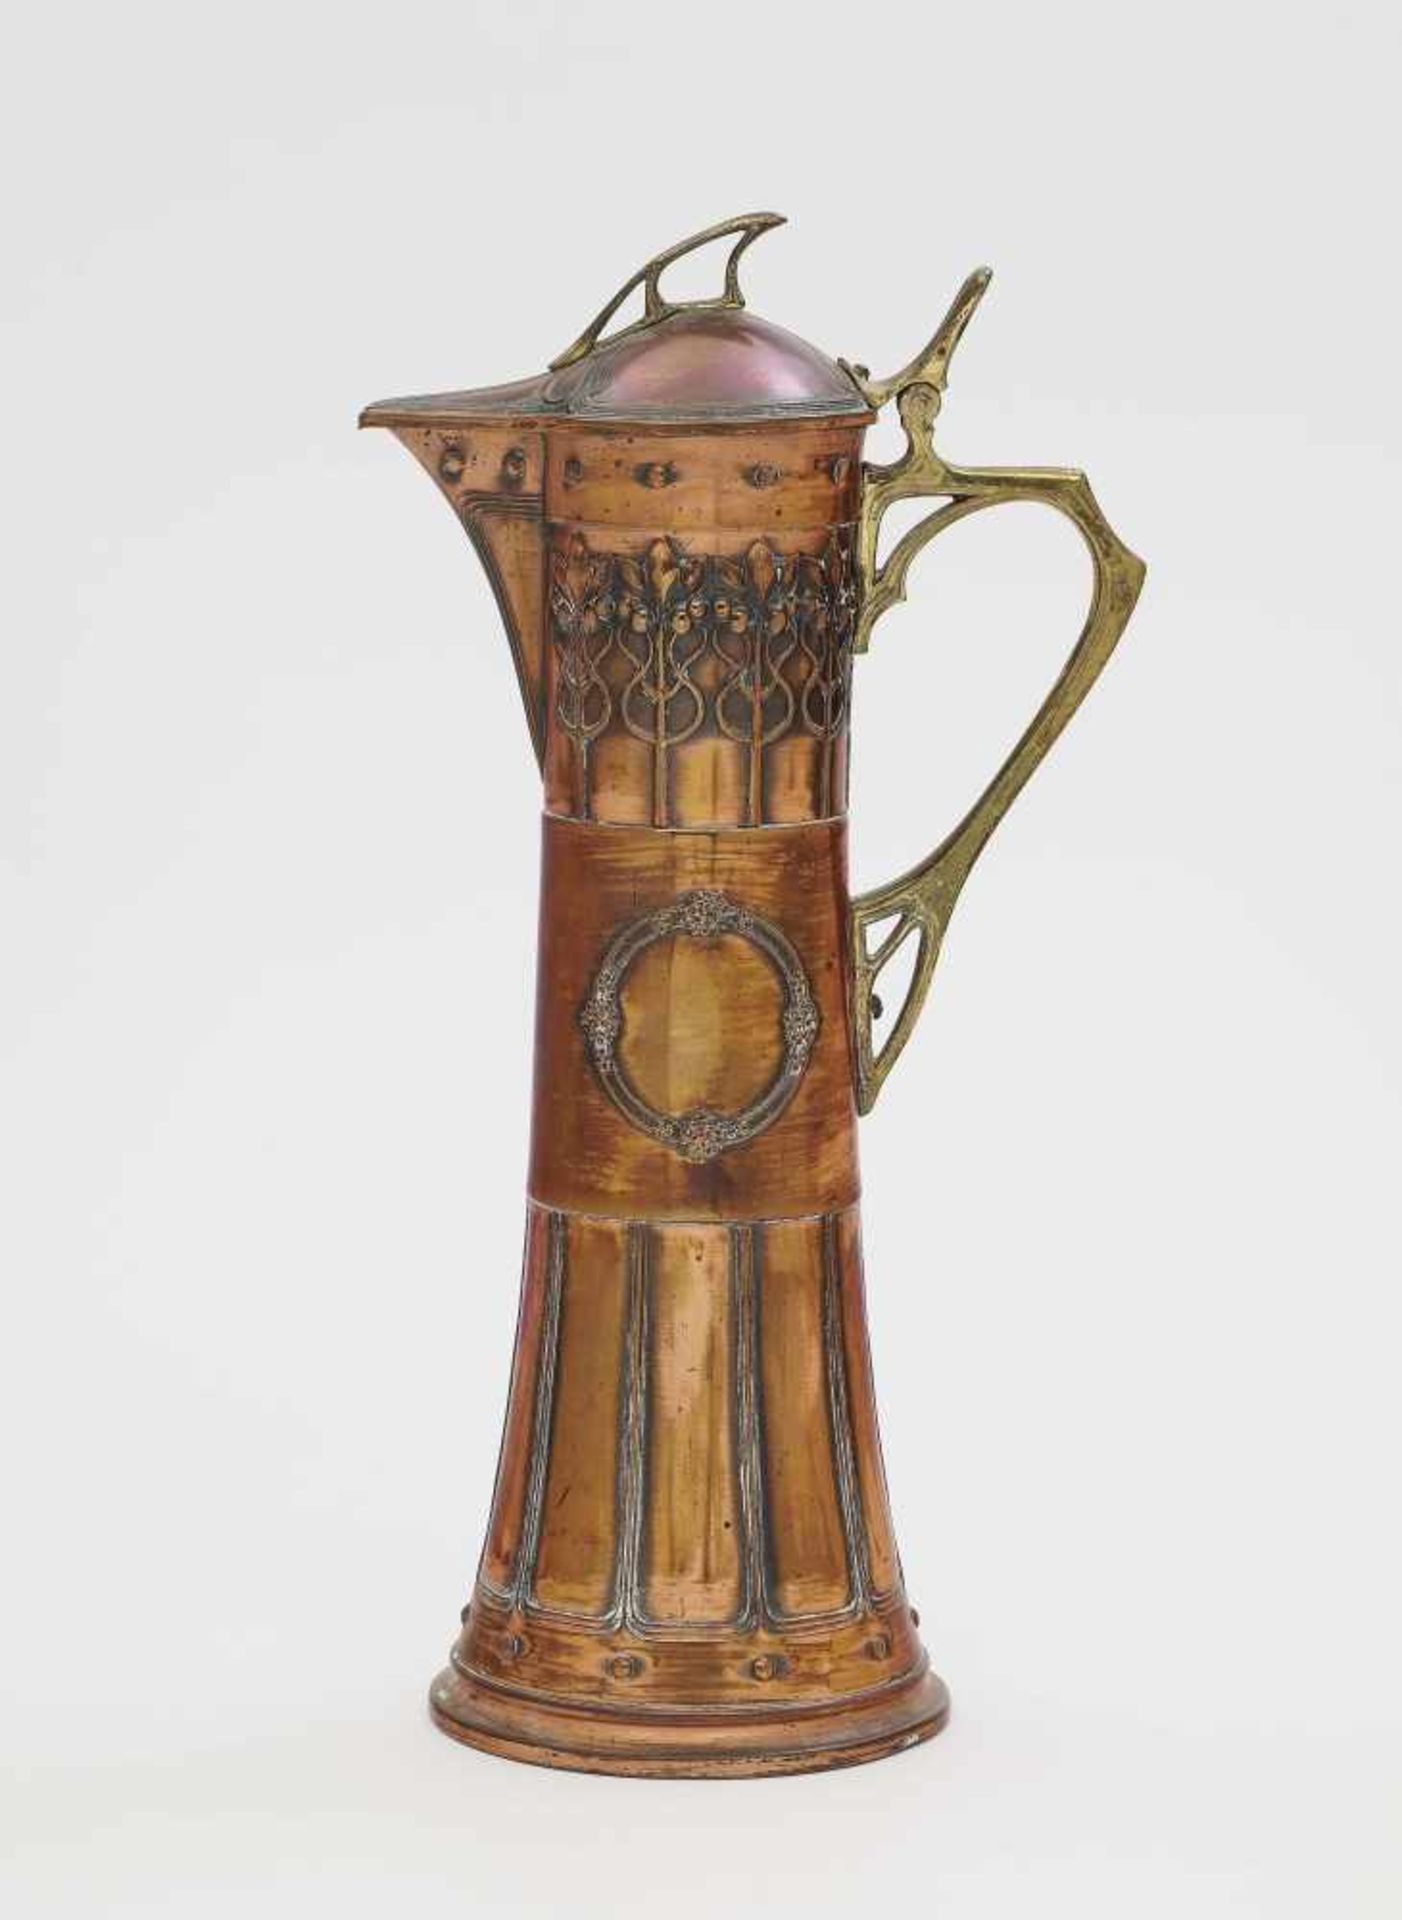 A wine jugWMF, Geislingen, 1904 Copper and brass. Vegetable handle and knob. Floral and ornamental